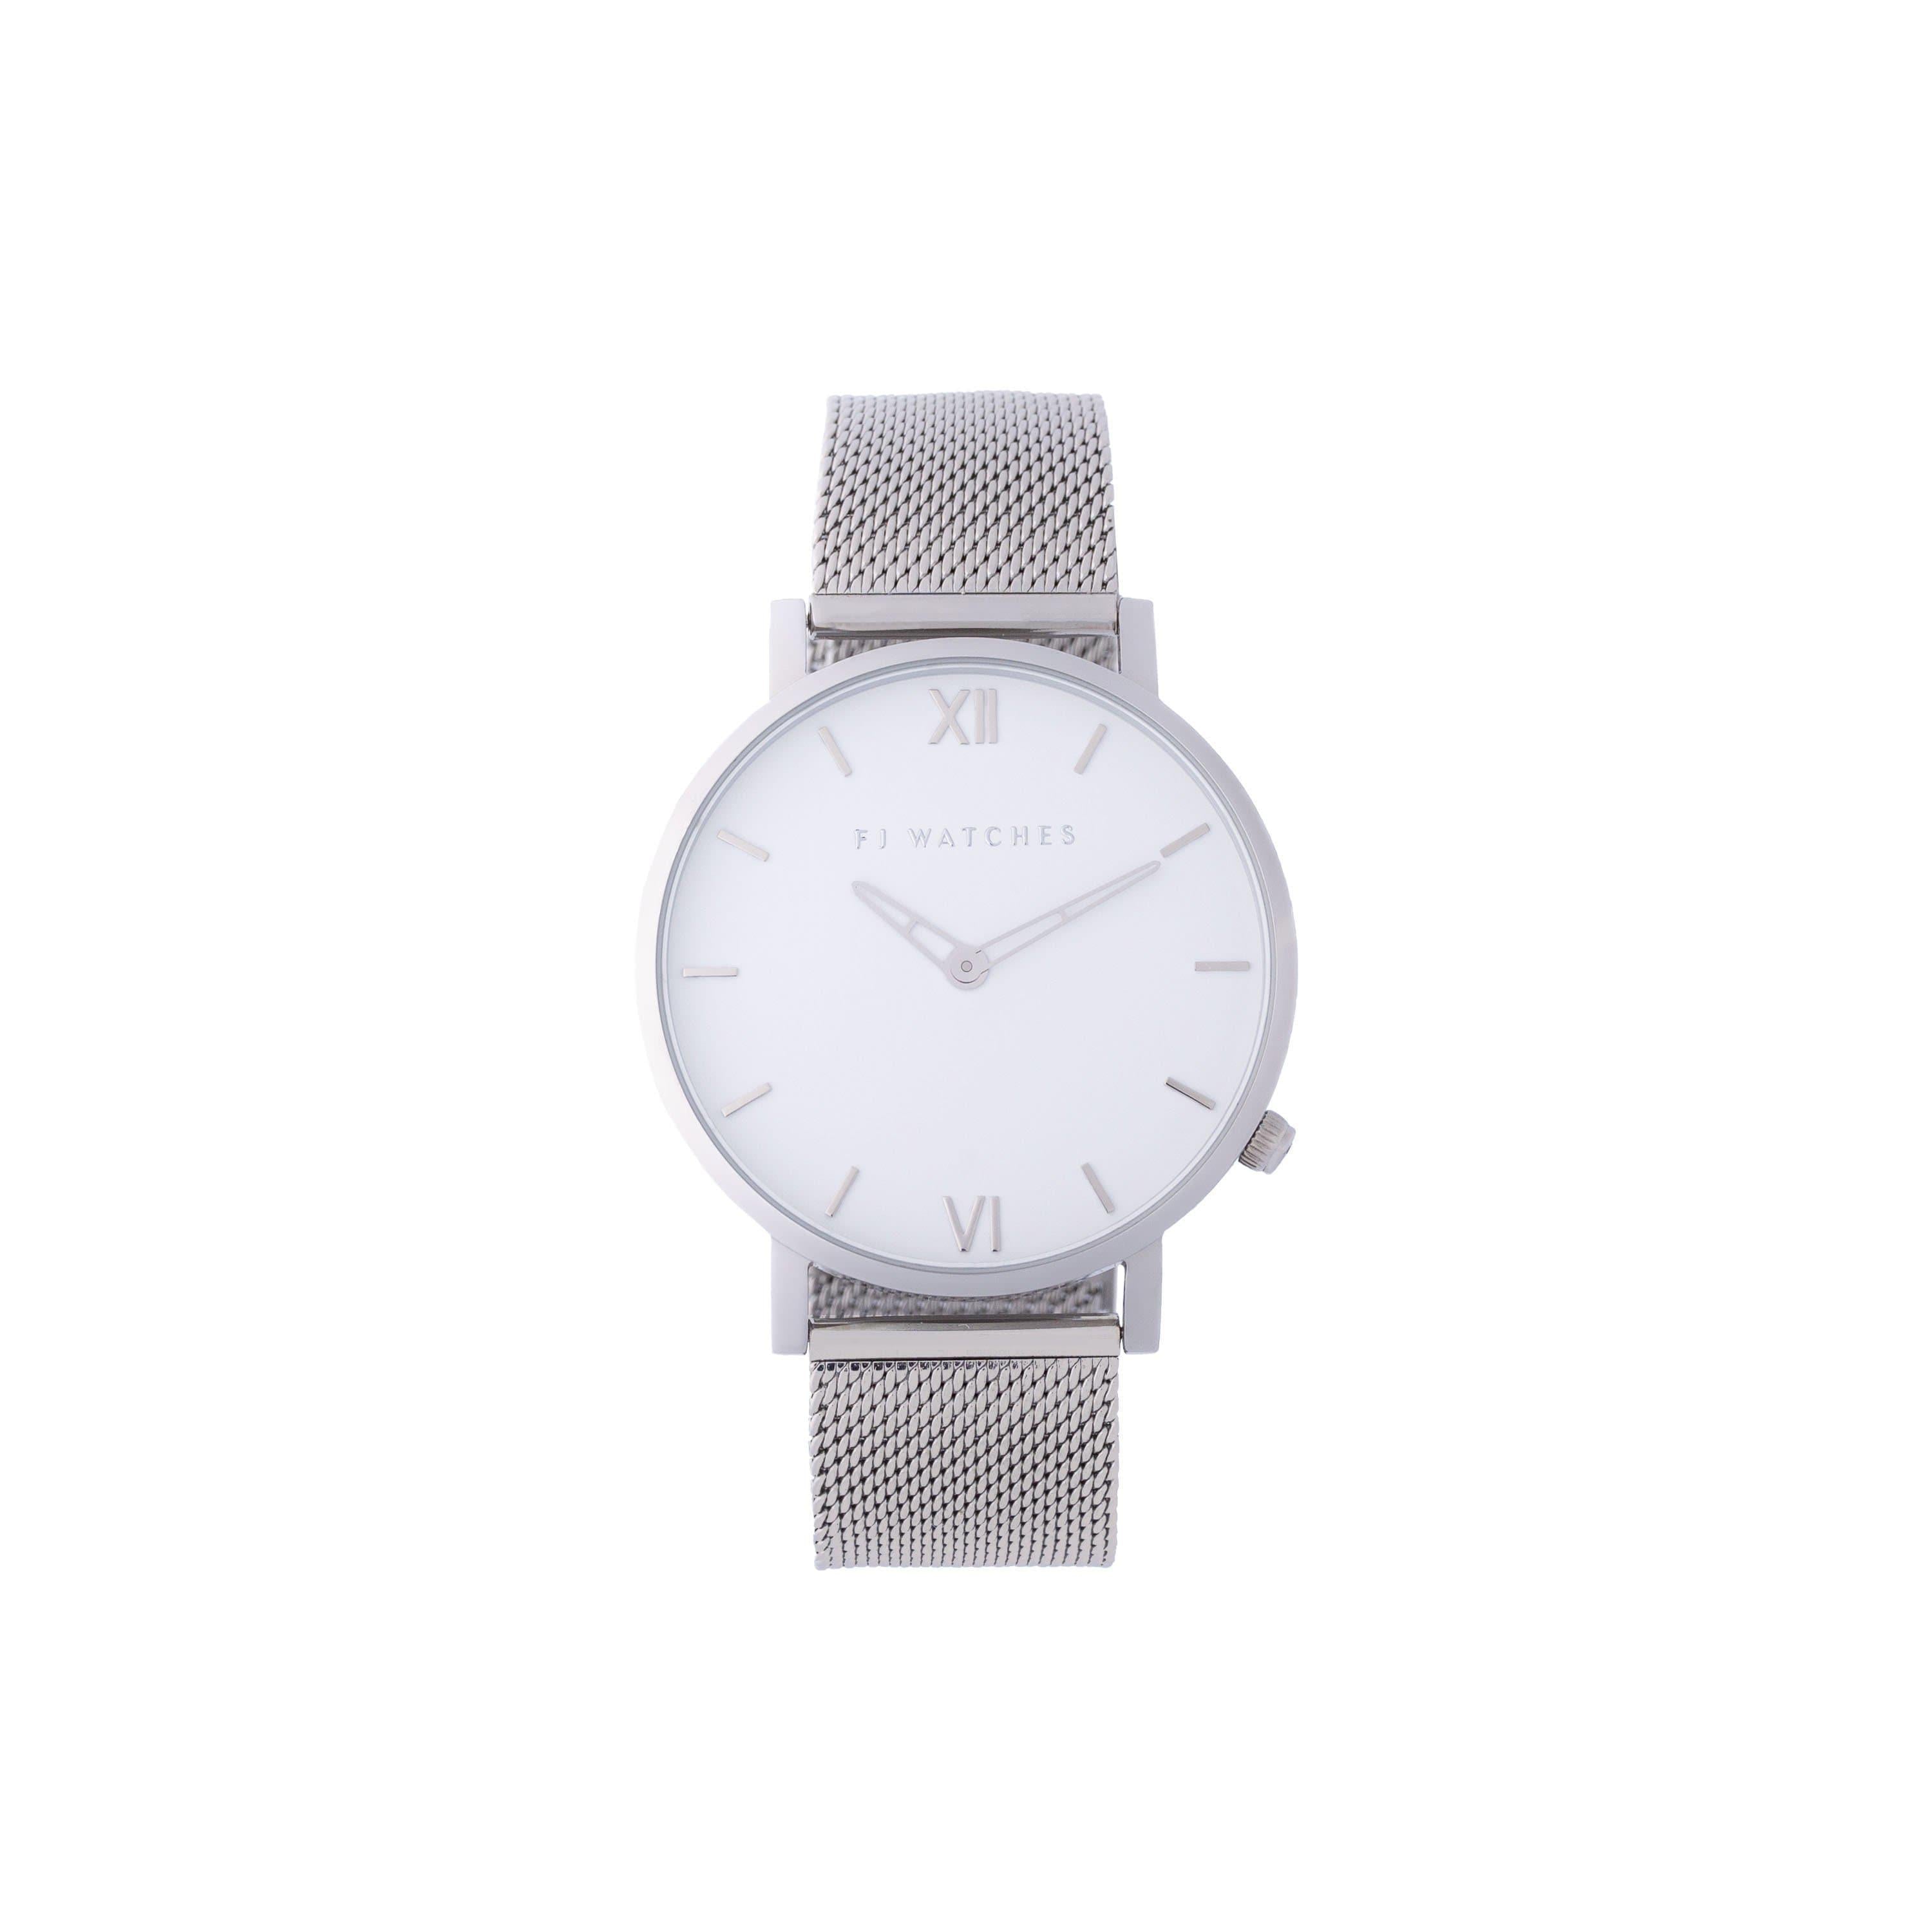 Discover Silver sun, a 42mm men's watch from Five Jwlry with a white and silver dial. This one can be paired with a silver or black mesh bracelet!